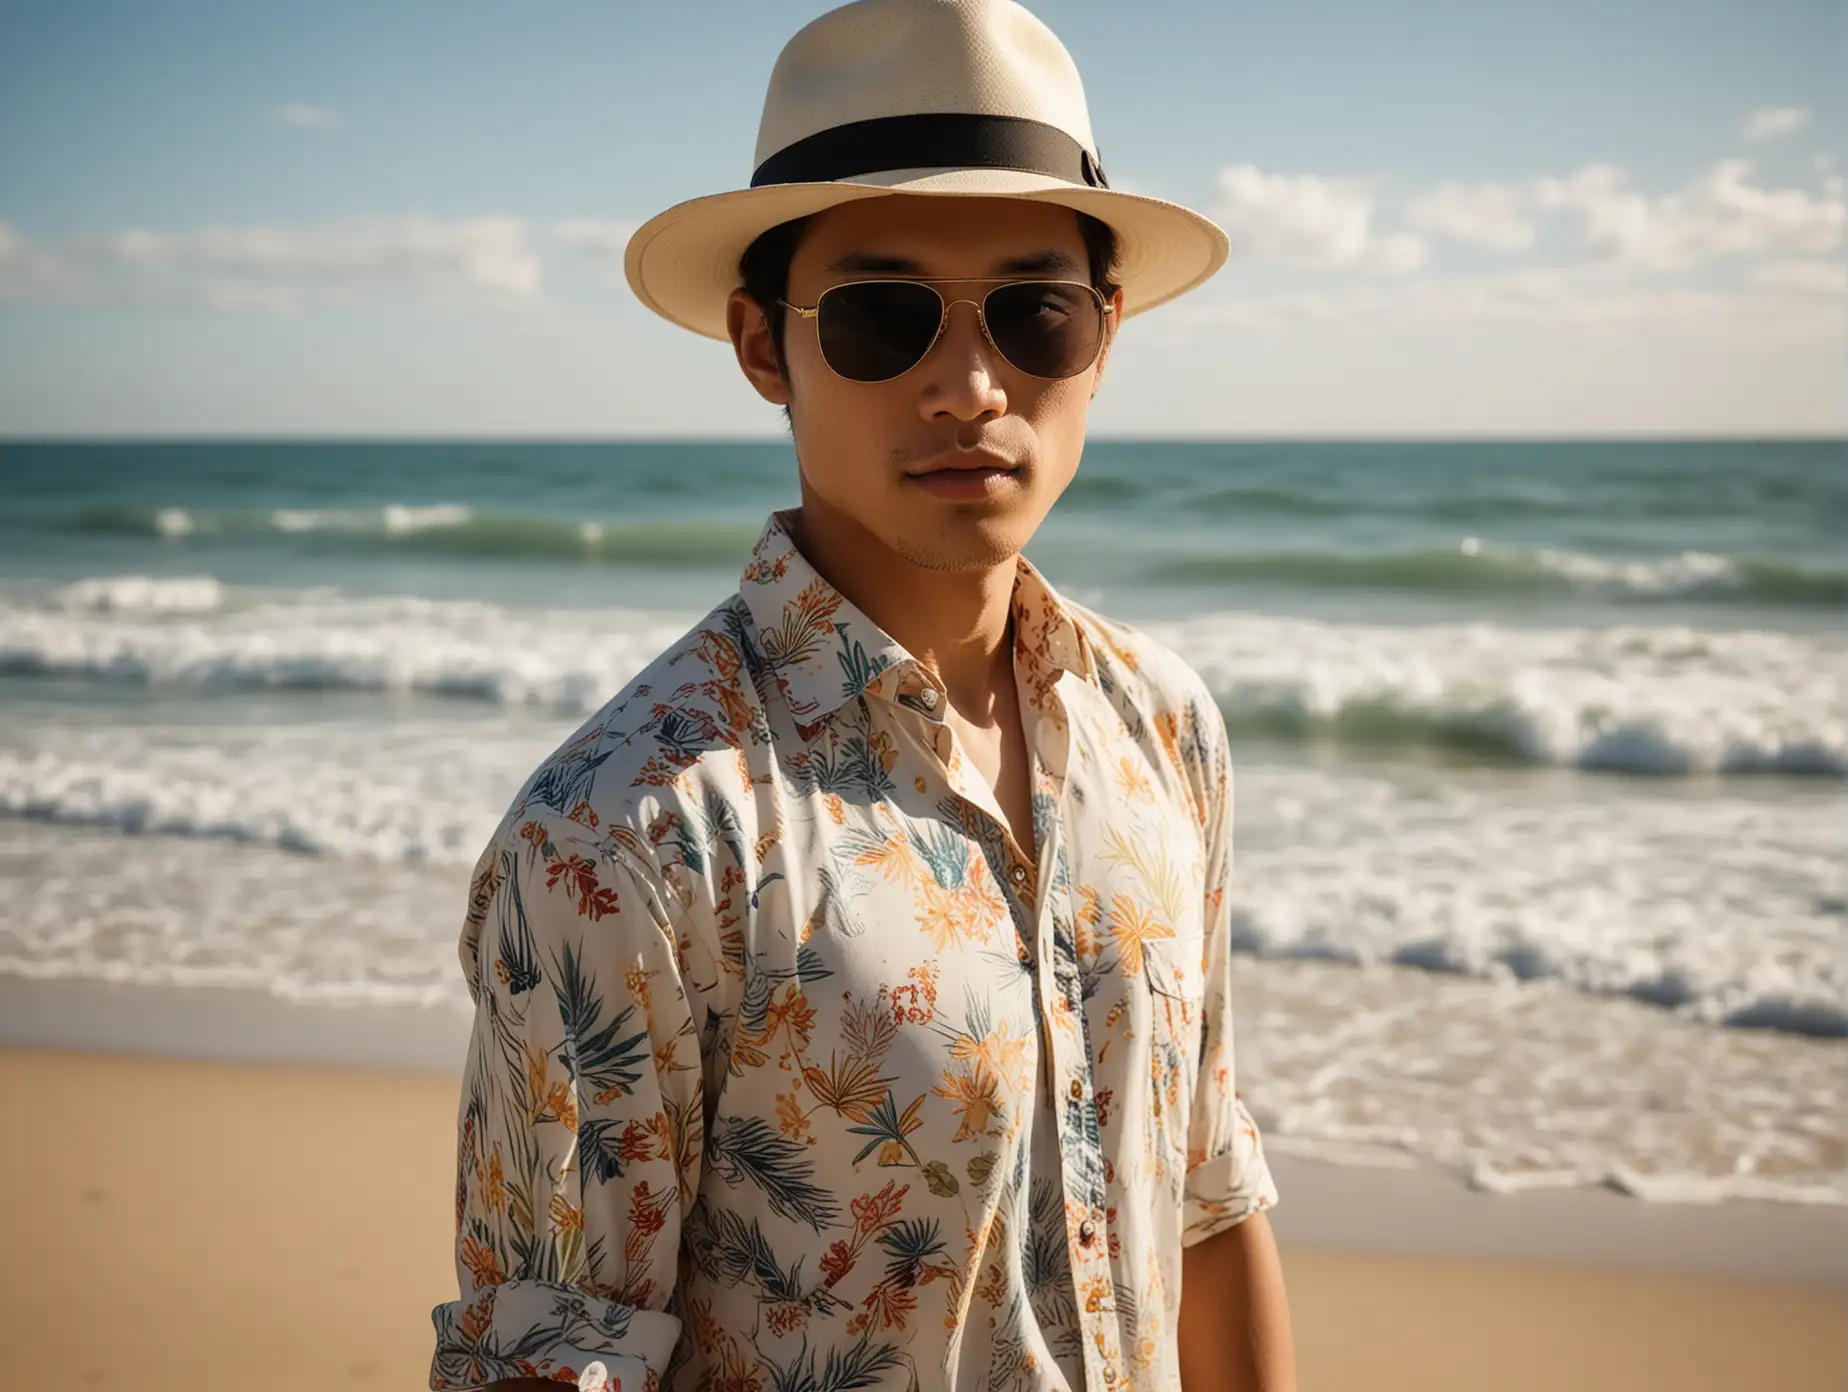 a headshot portrait photograph captivating composition inspired by Annie Leibovitz's iconic style, showcasing a young asian man wears white fedora hat, beach hawai-motive colorful shirt, walking gracefully on the sandy shores of a sun-drenched beach. With the Sigma 85mm 1.4F lens, capture him delicately holding his sunglasses with his fingers, adding an element of contemplation to the scene against the backdrop of the serene ocean waves.